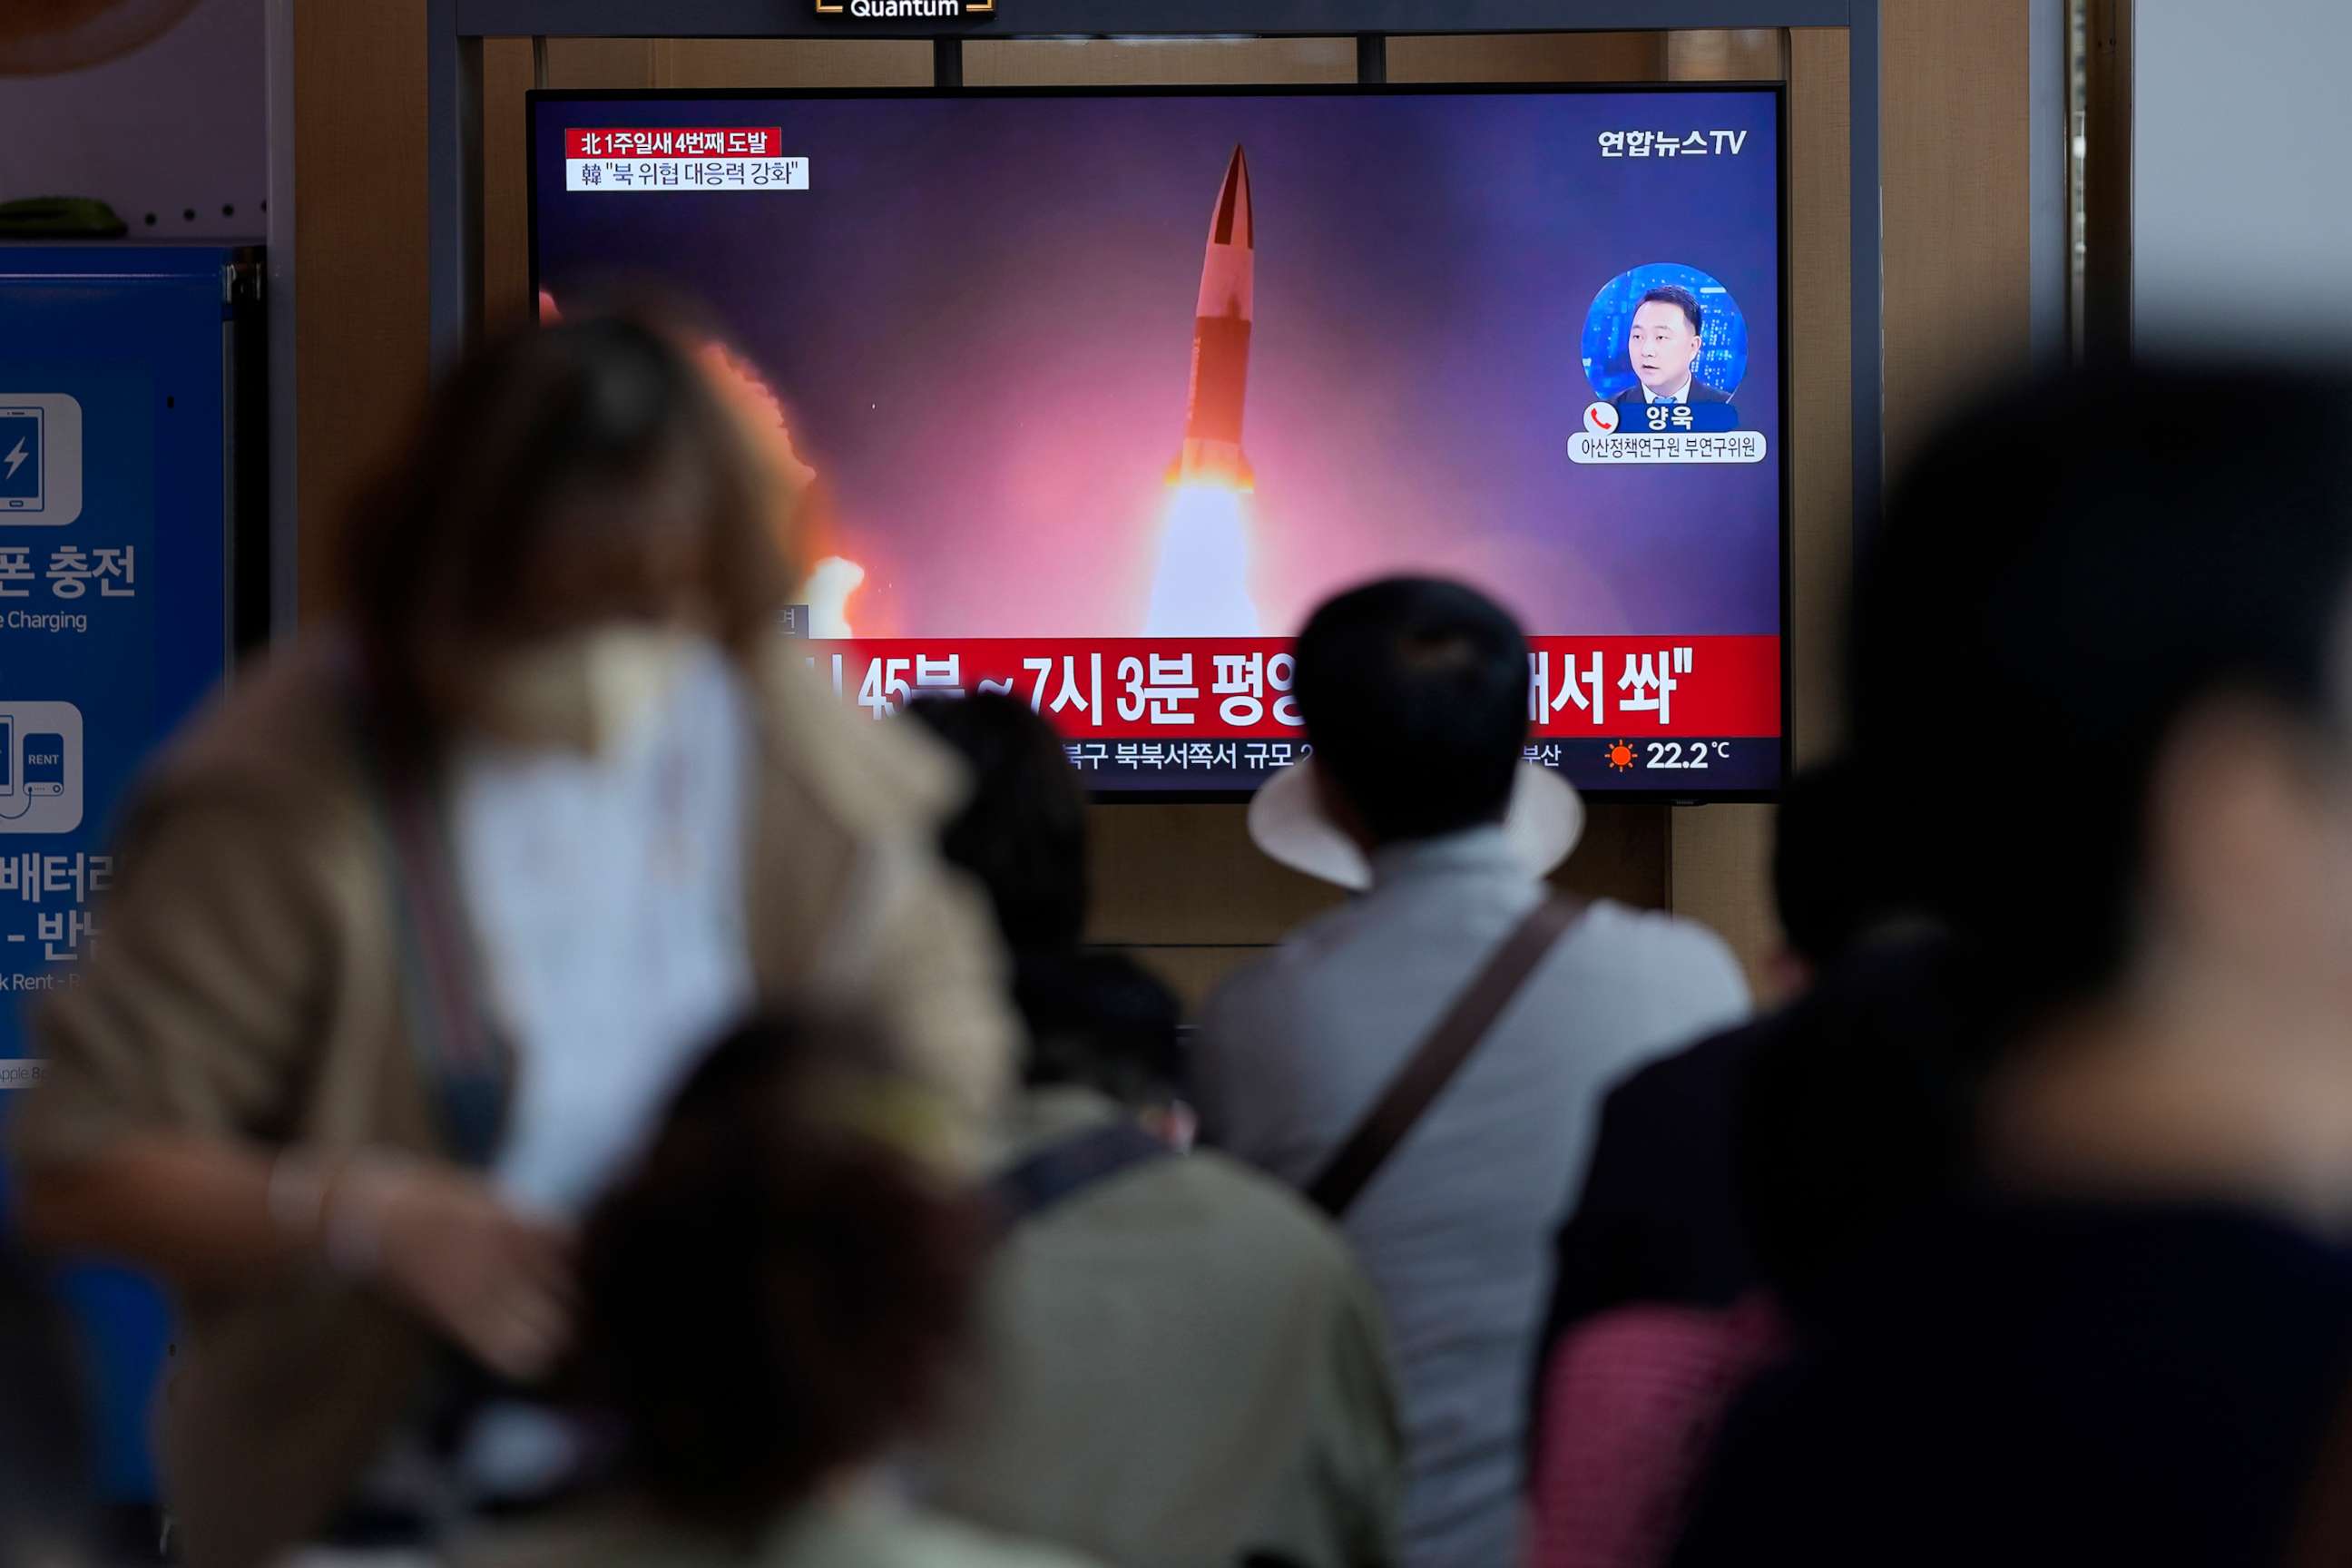 PHOTO: A TV screen showing a news program reporting about North Korea's missile launch with file imagery, is seen at the Seoul Railway Station in Seoul, South Korea, Oct. 1, 2022. 